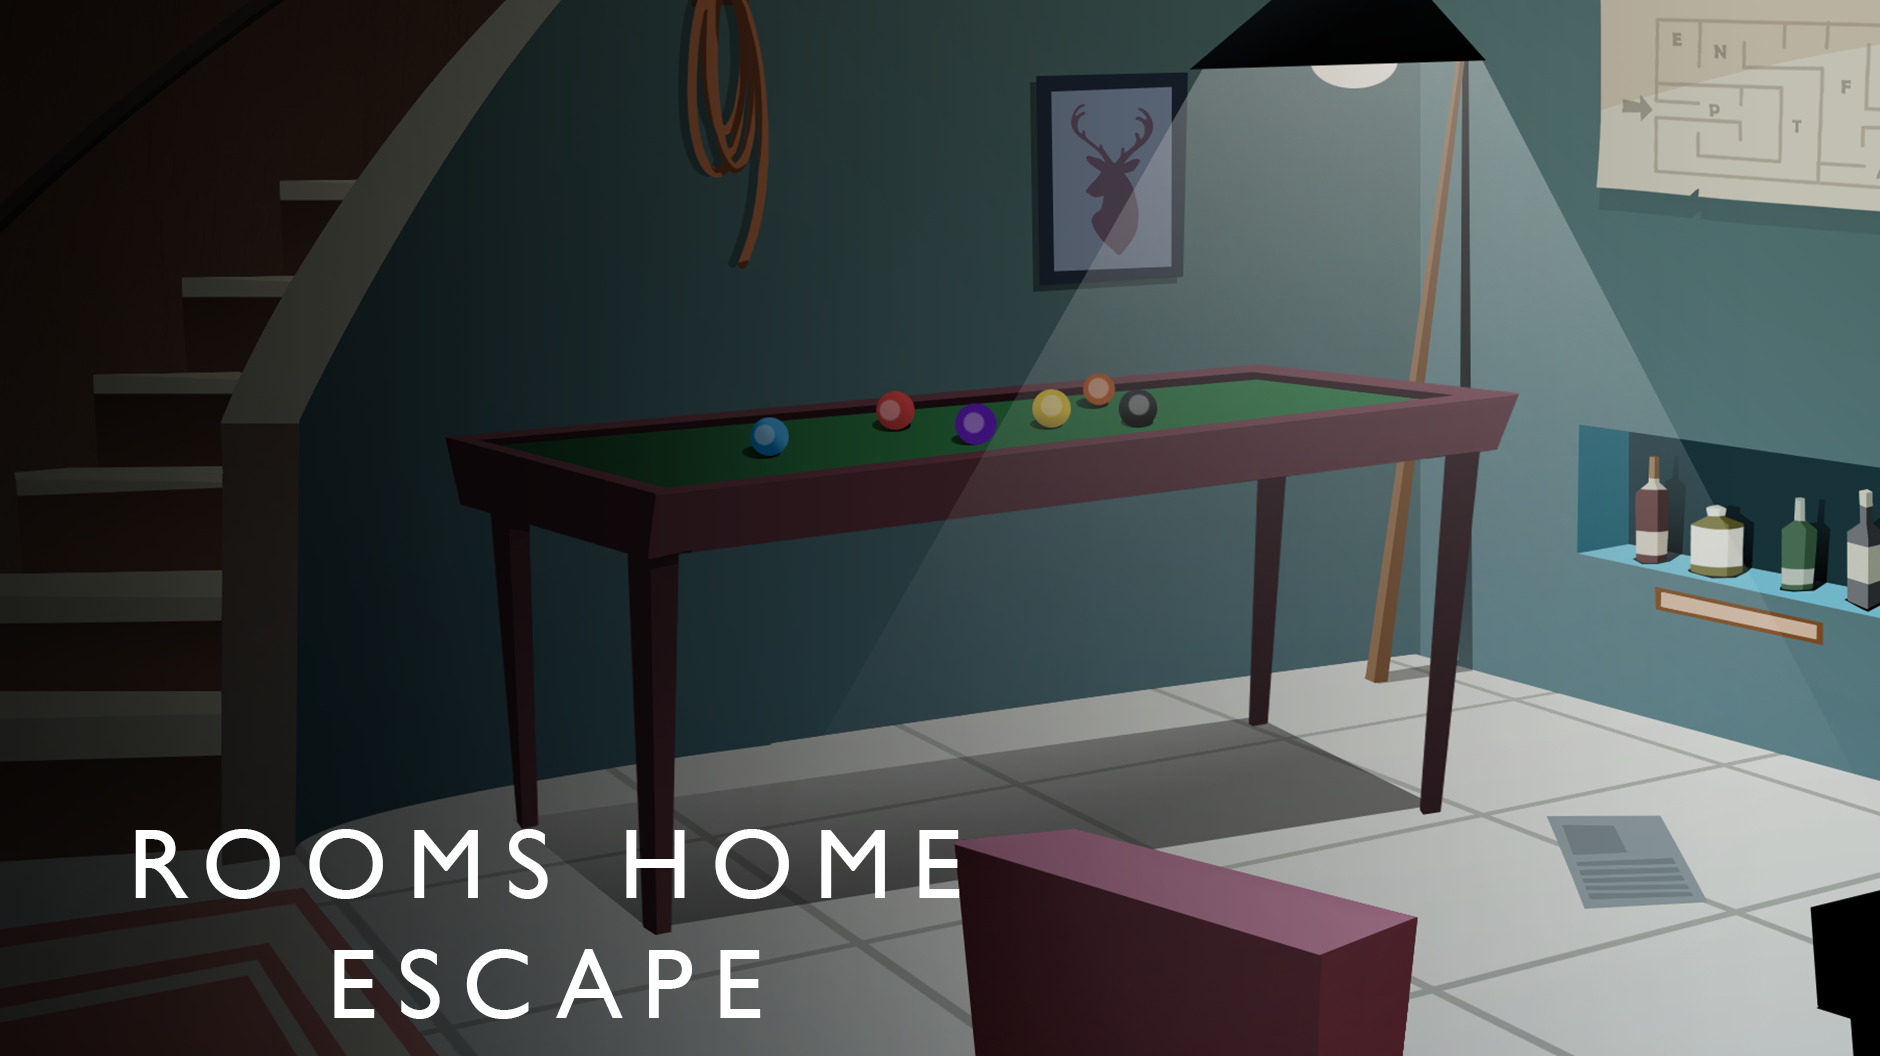 Rooms Home Escape Game Image